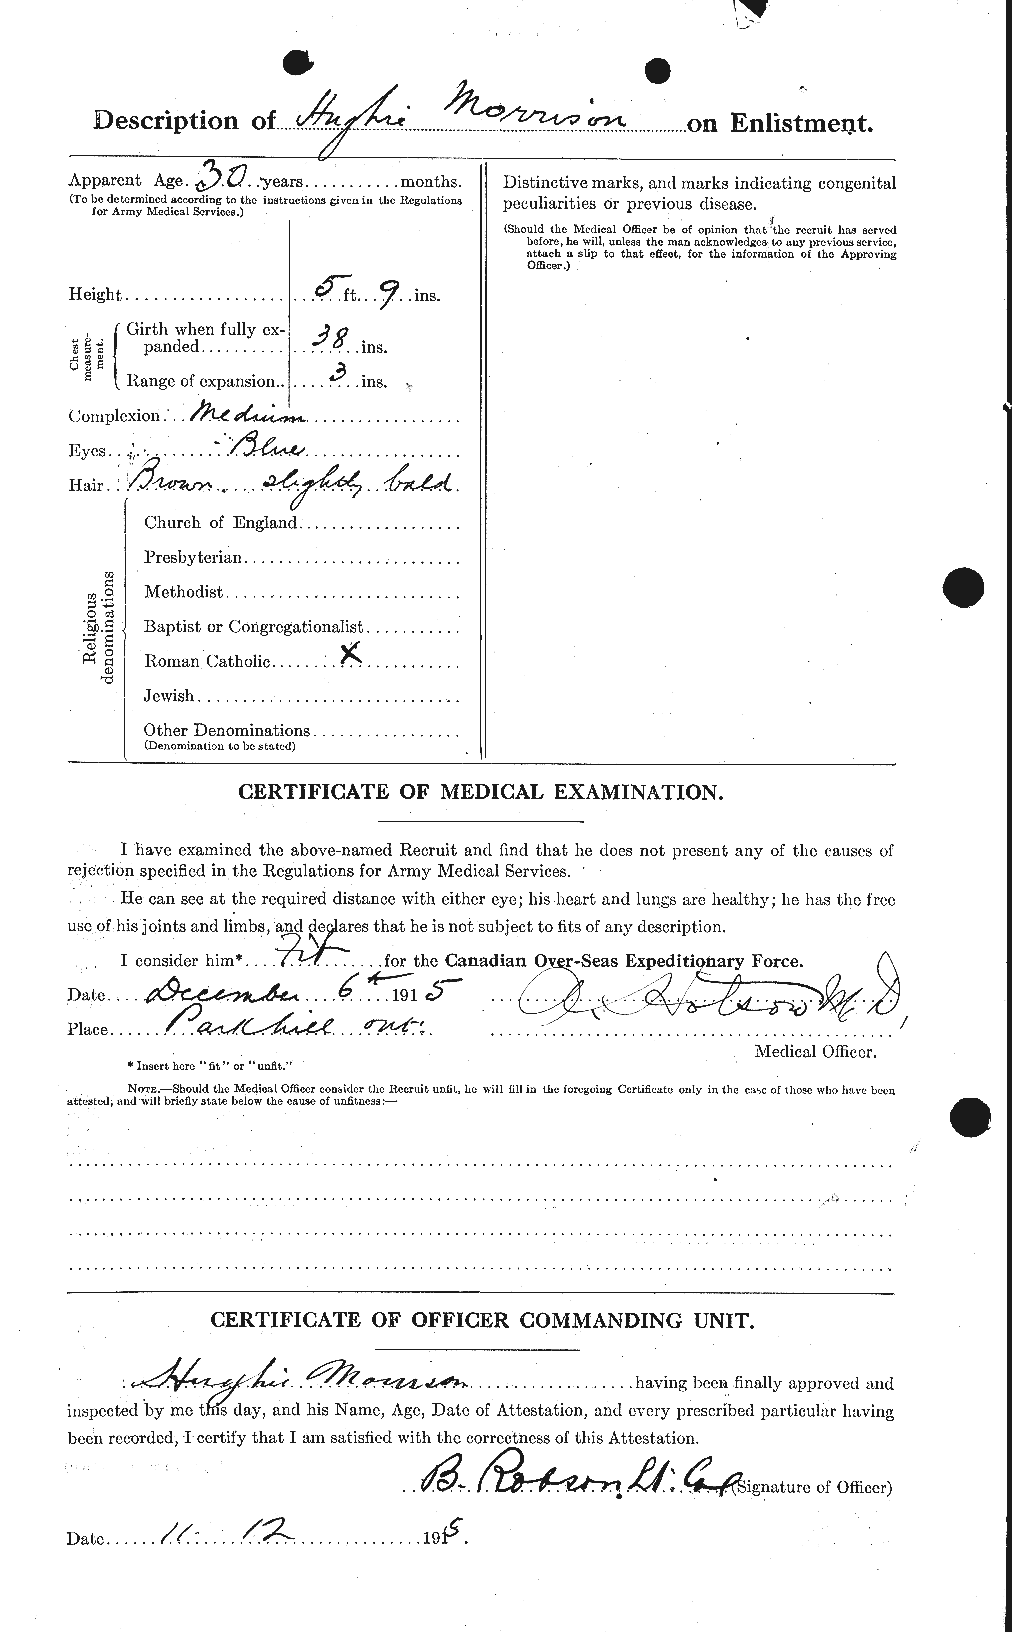 Personnel Records of the First World War - CEF 506878b